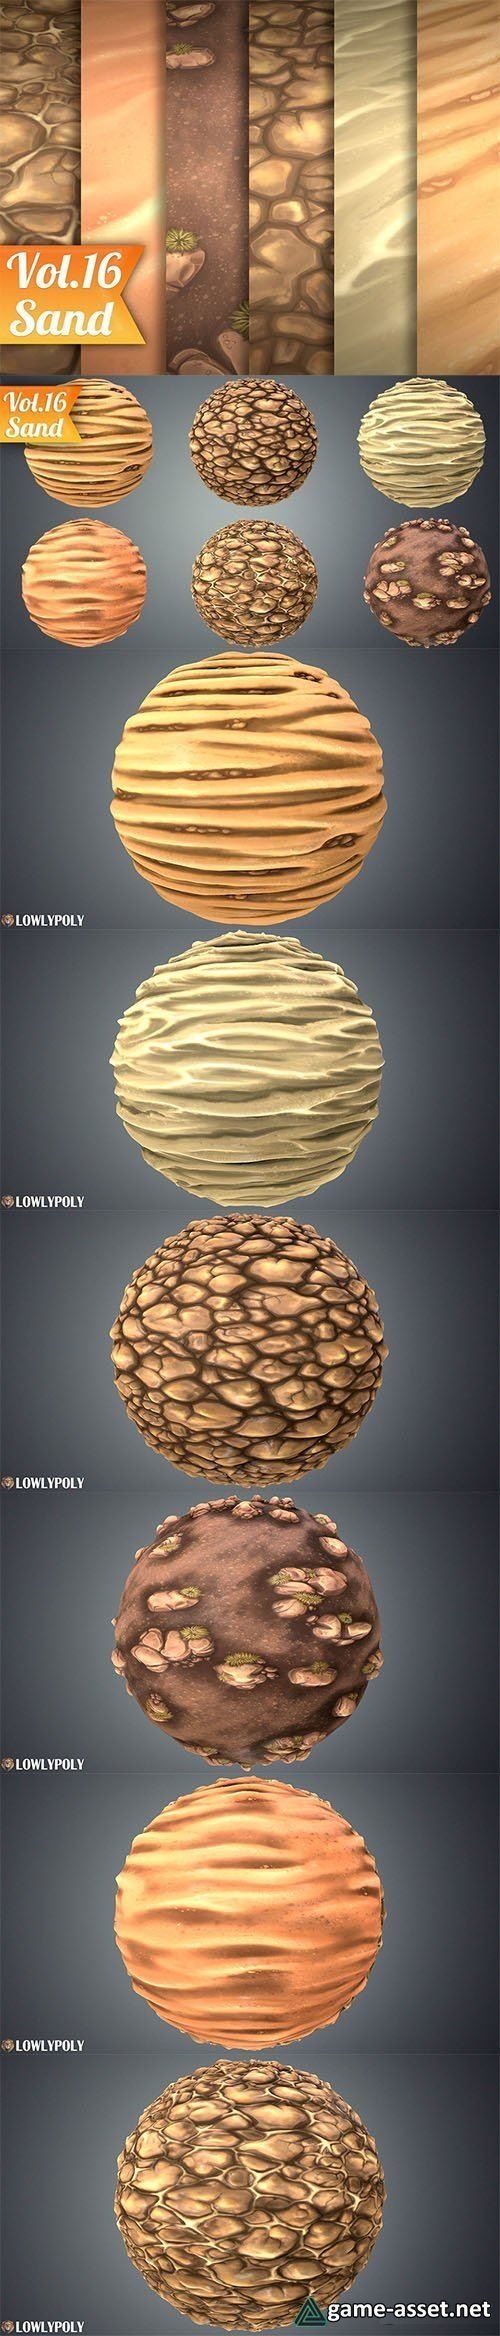 Stylized Sand Vol 16 - Hand Painted Texture Pack